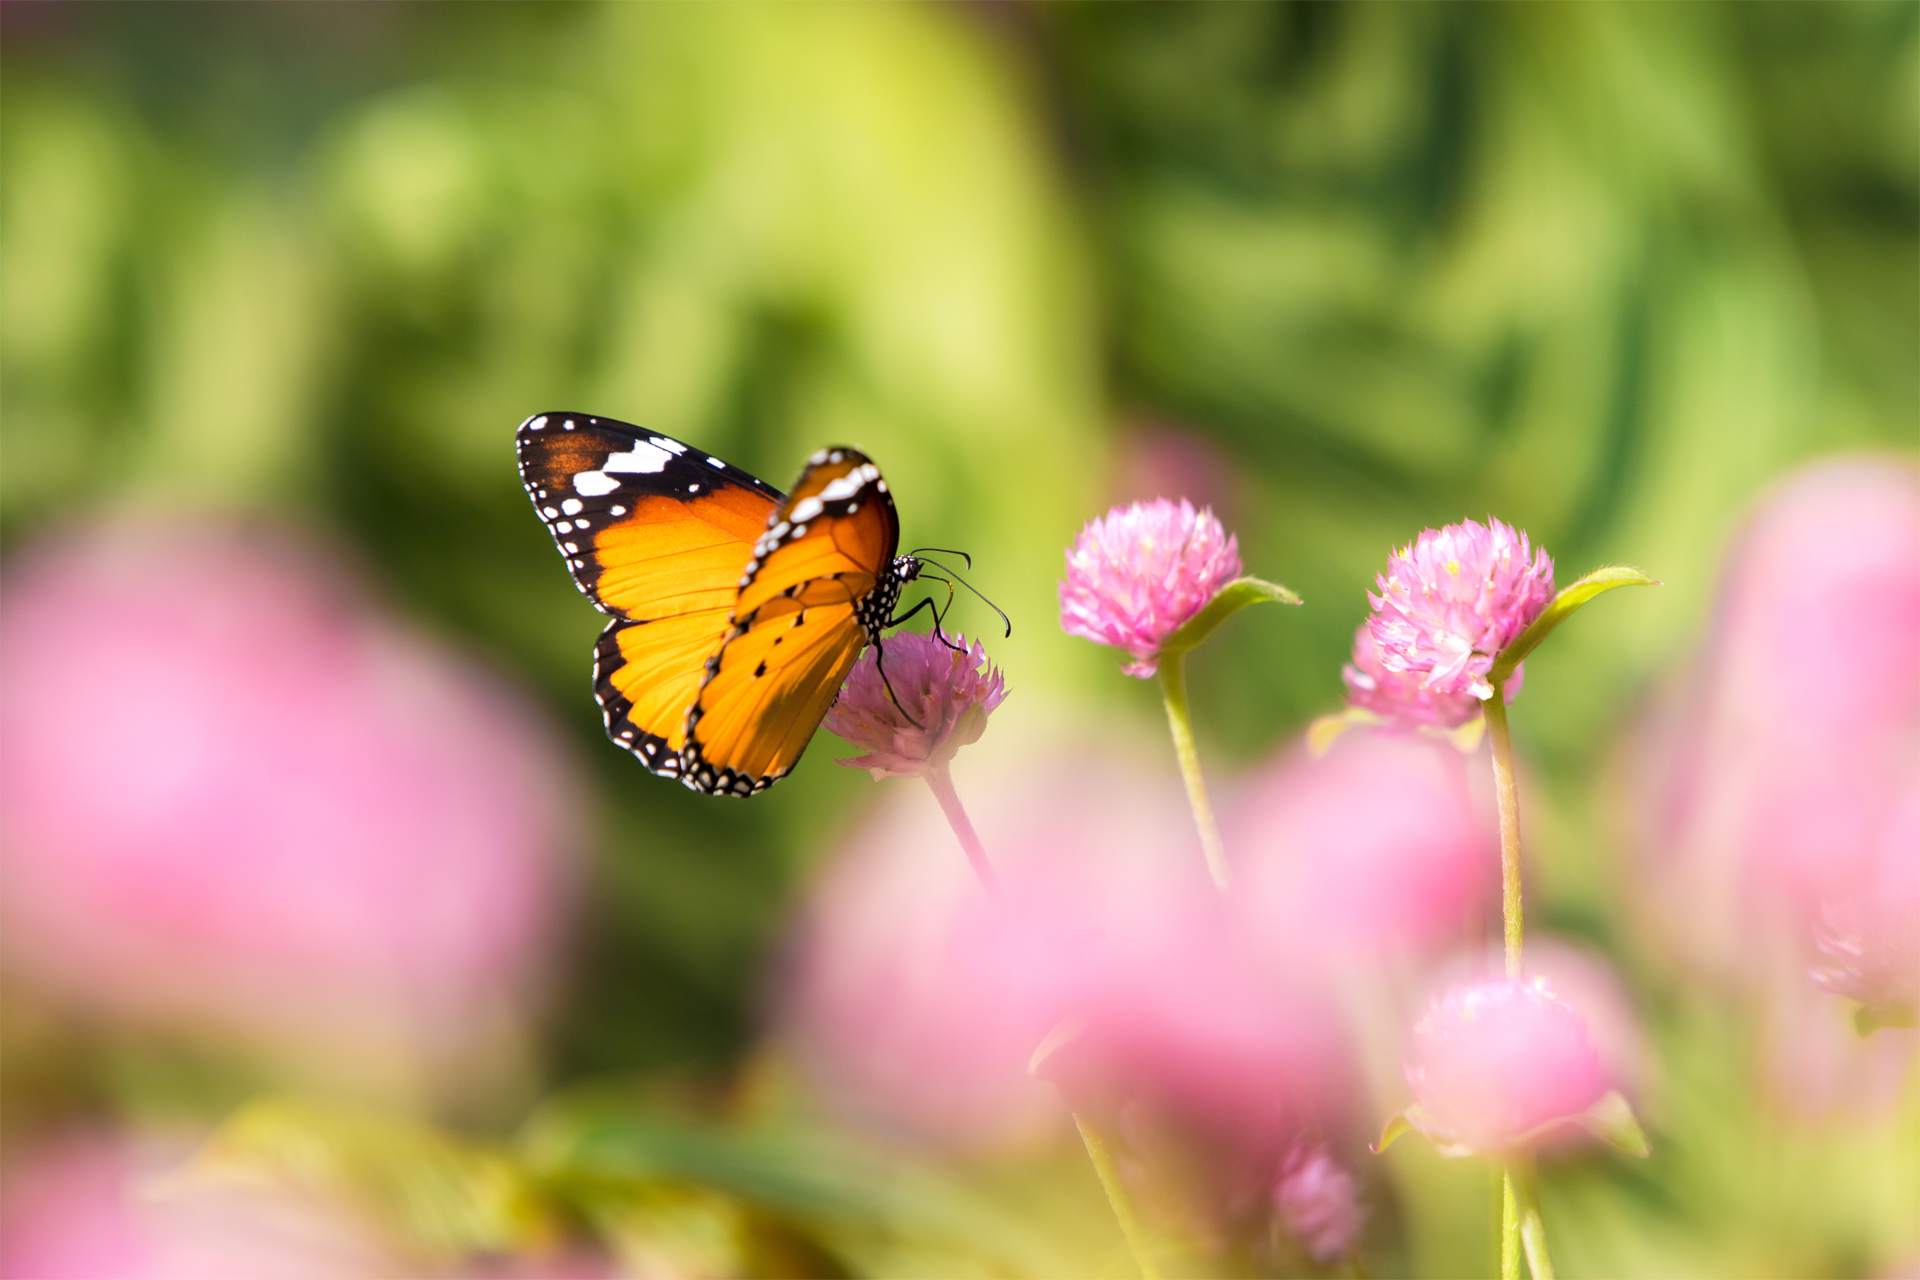 A butterfly is flying over a pink flower.